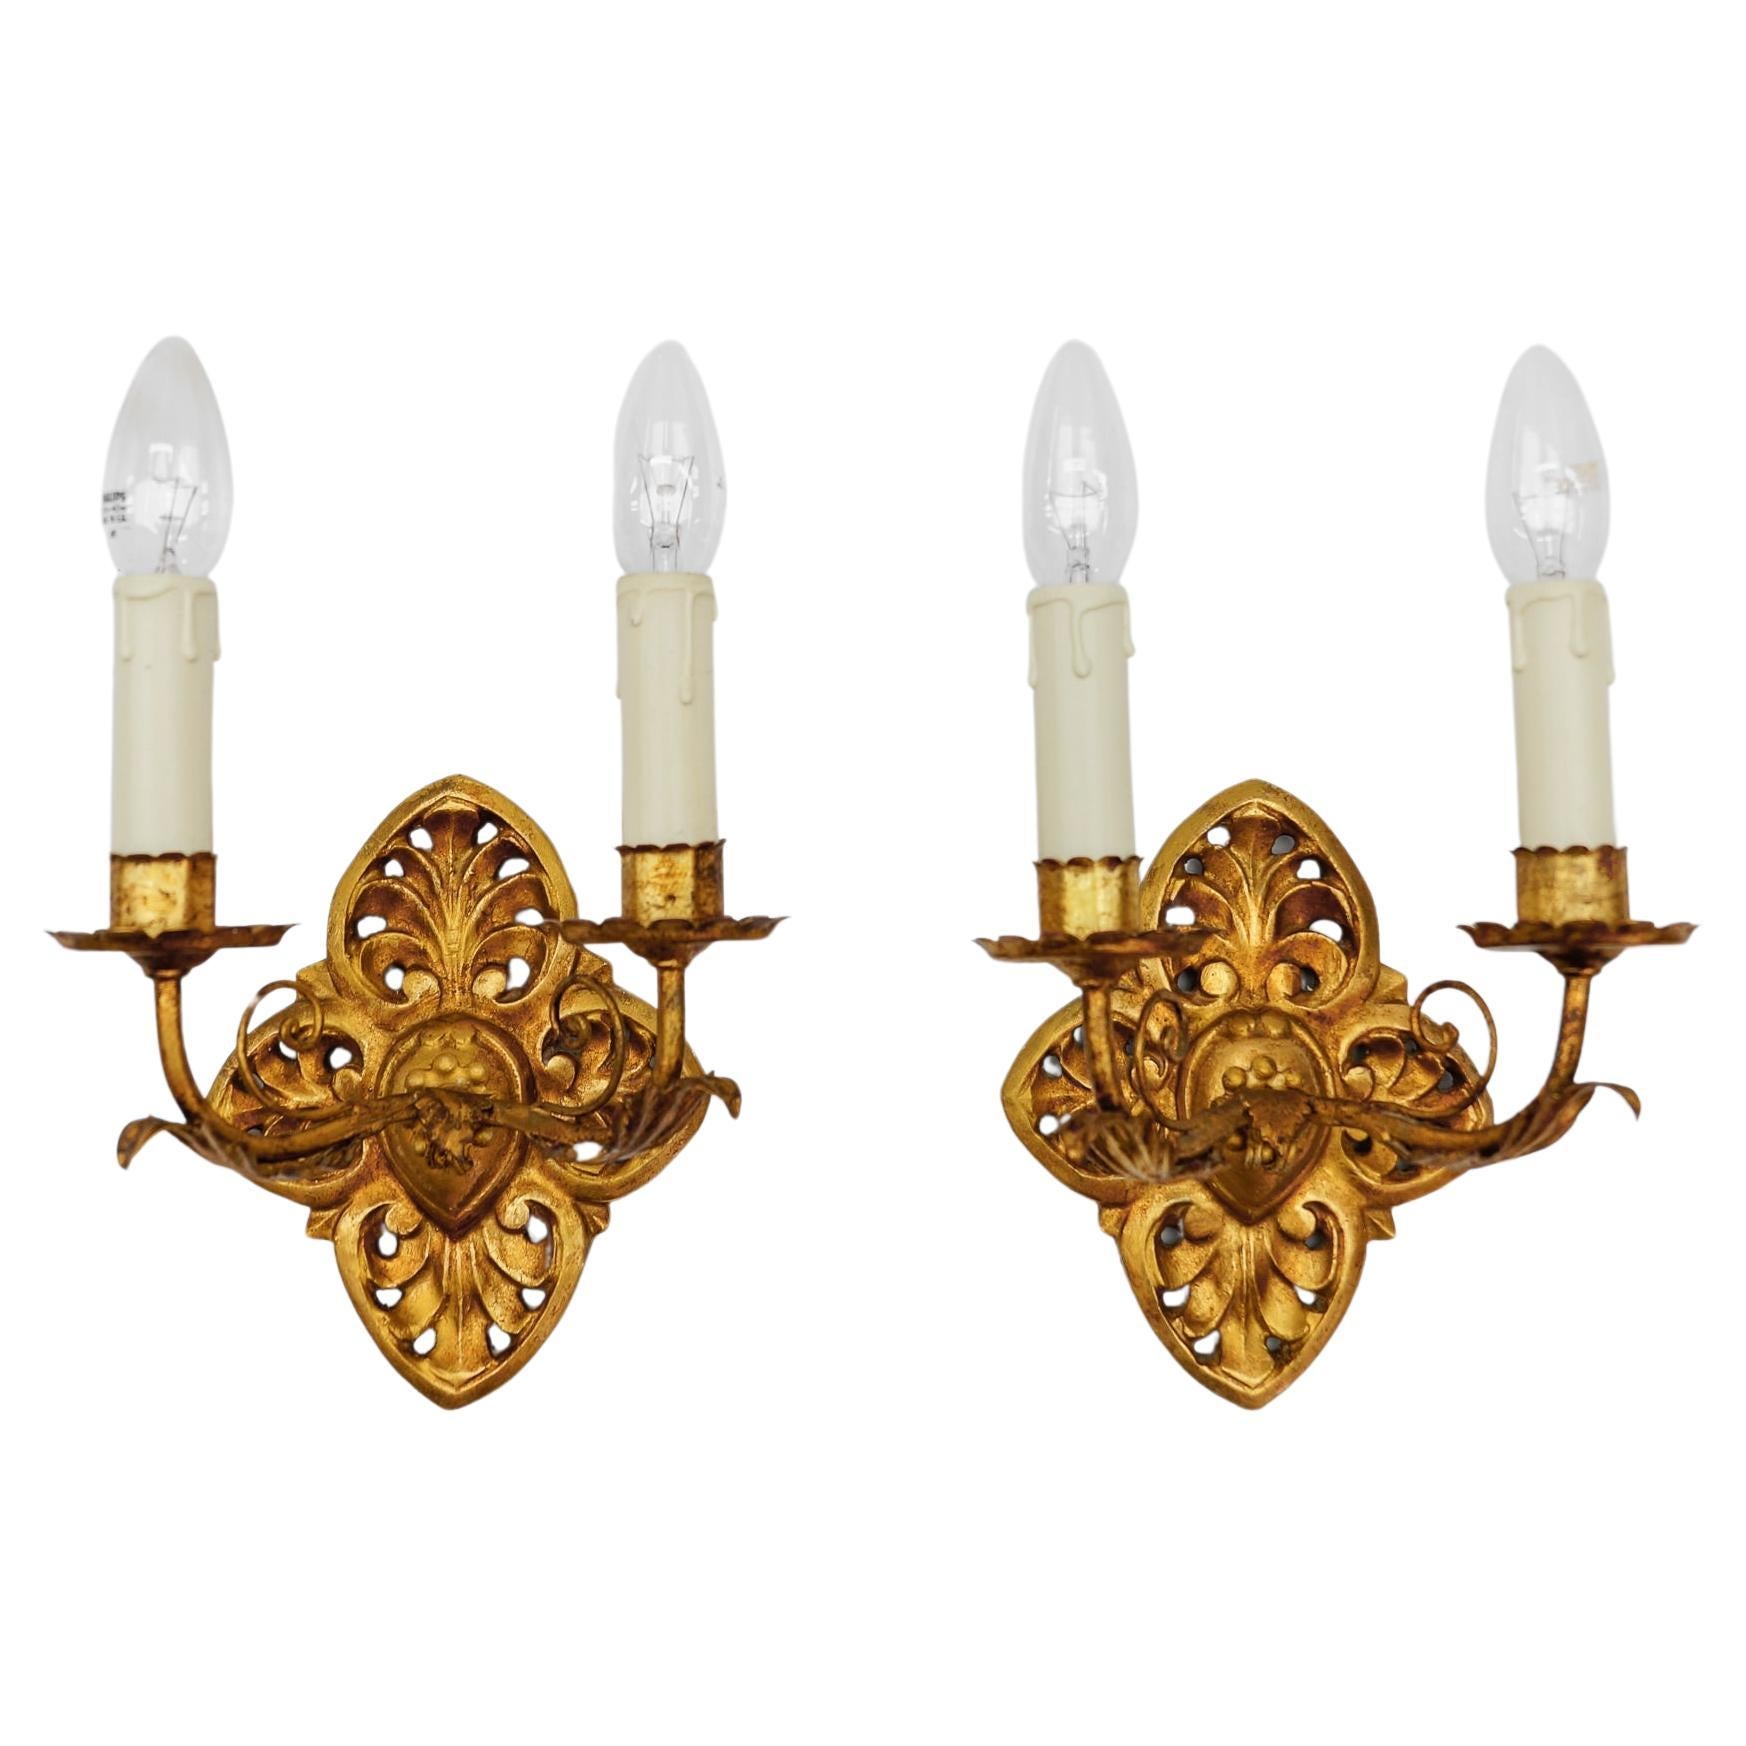 Pair of Hollywood Regency Double Wall Lights, Germany 1960s